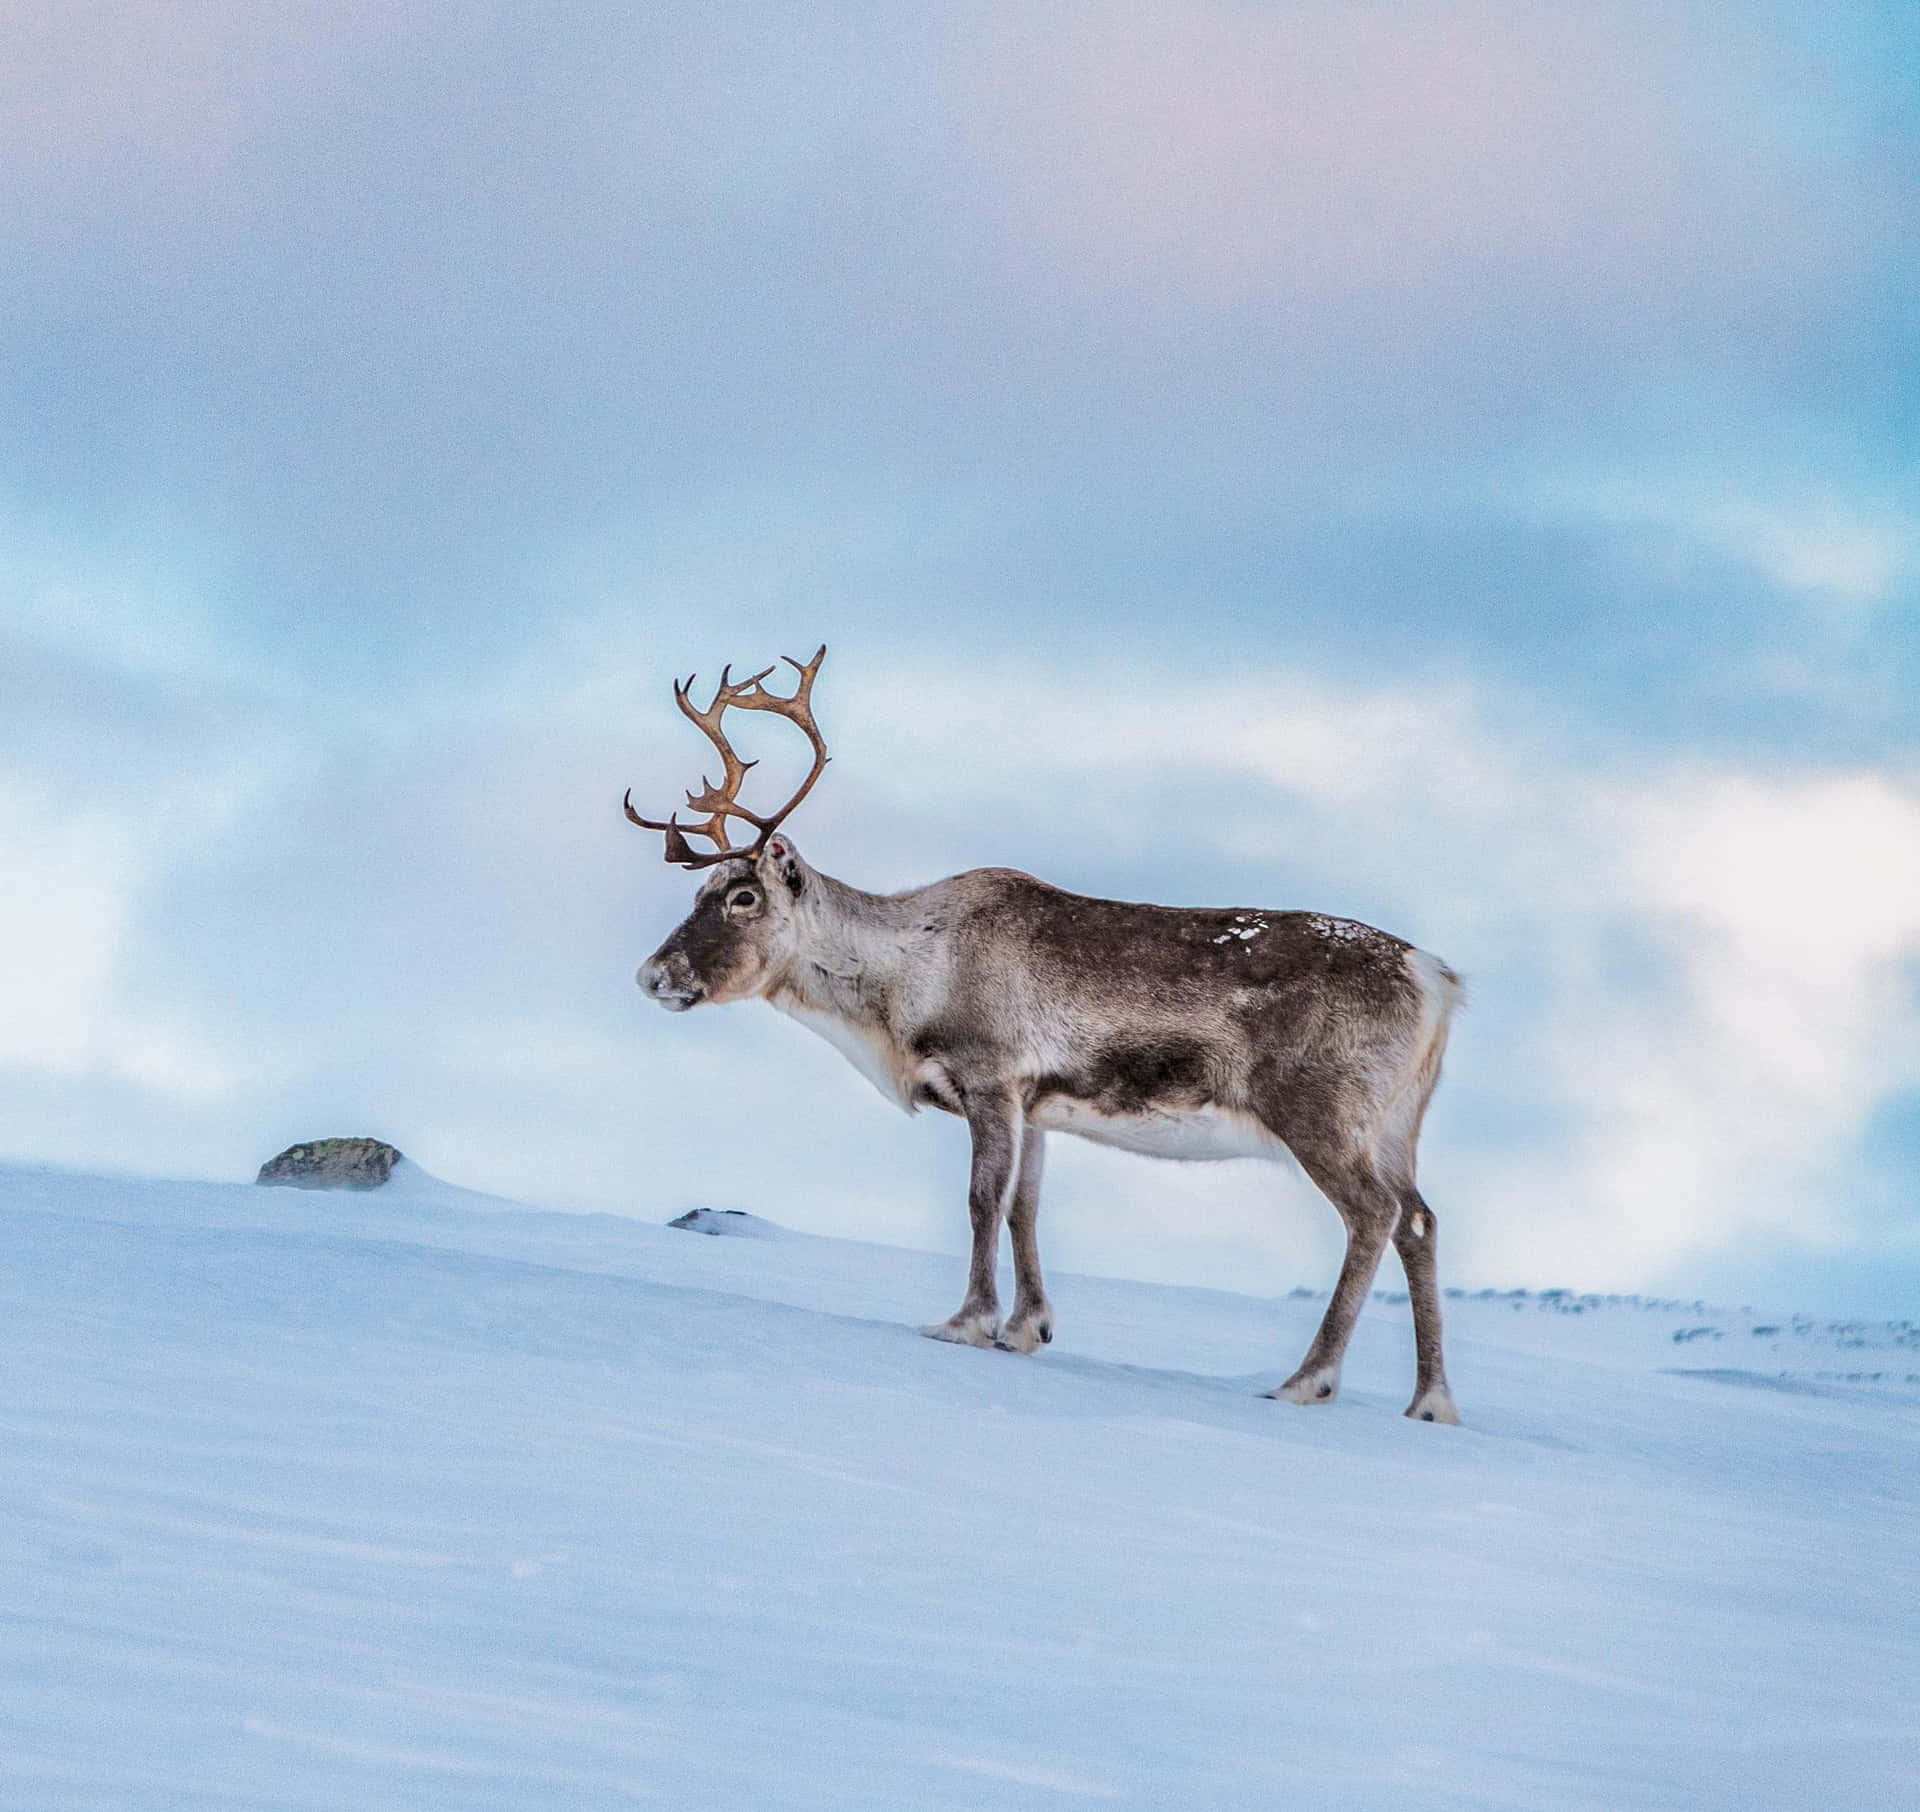 Reindeer In The Snow On A Snowy Hill